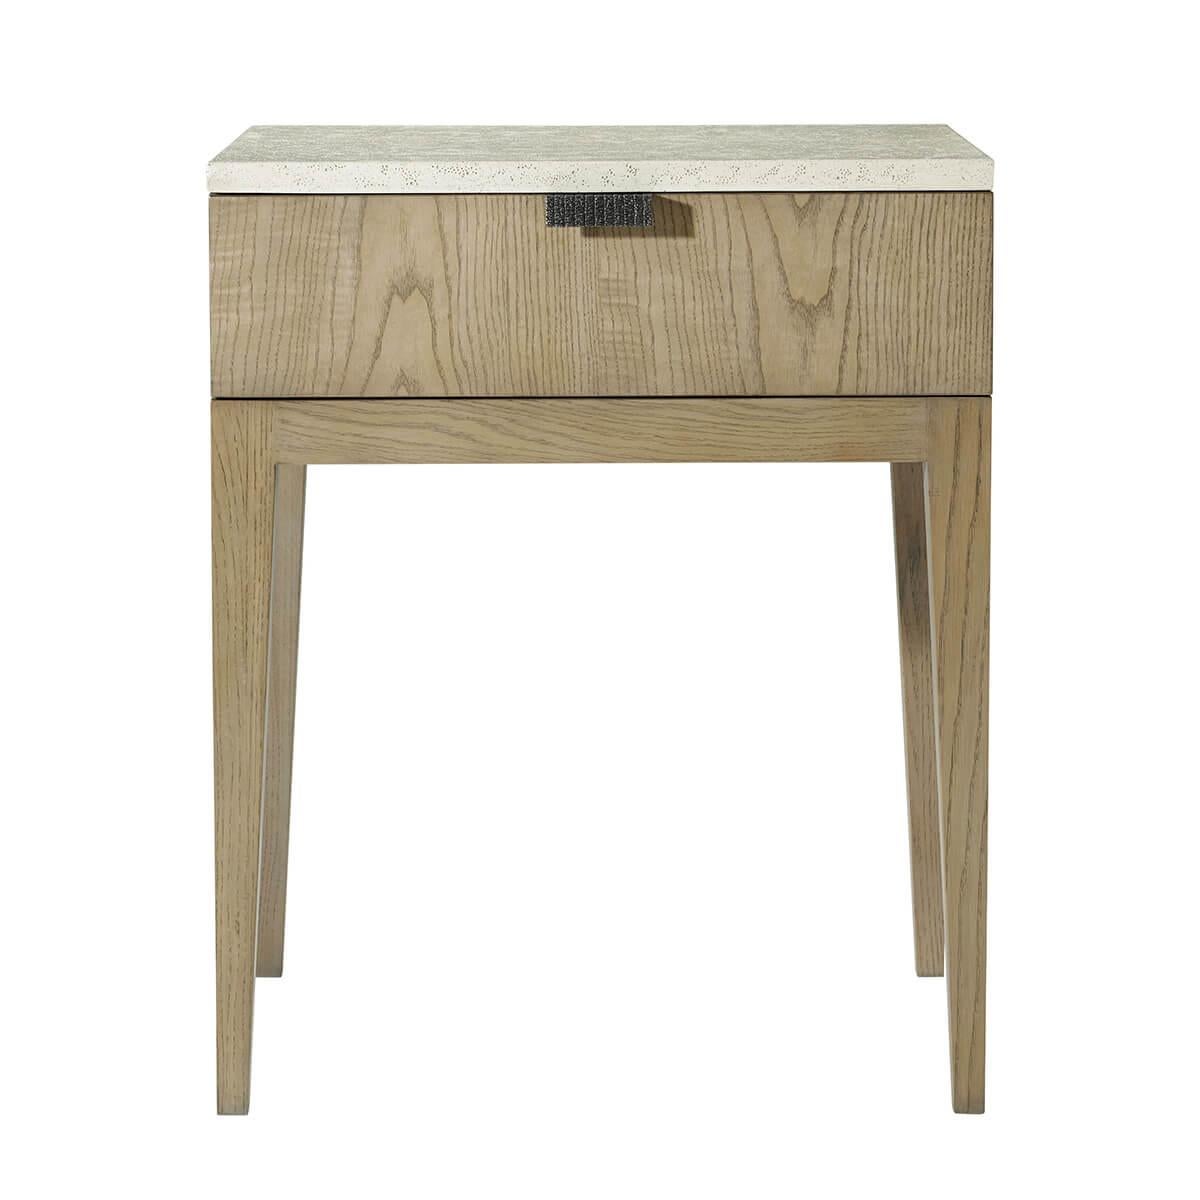 A modern single drawer nightstand perfect for any bedroom. Seen here in clean-cut figured ash in our light Dune finish with a textured metal pull in Ember finish. Completed with a stone-like porous top in our exclusive Mineral finish.

Dimensions: